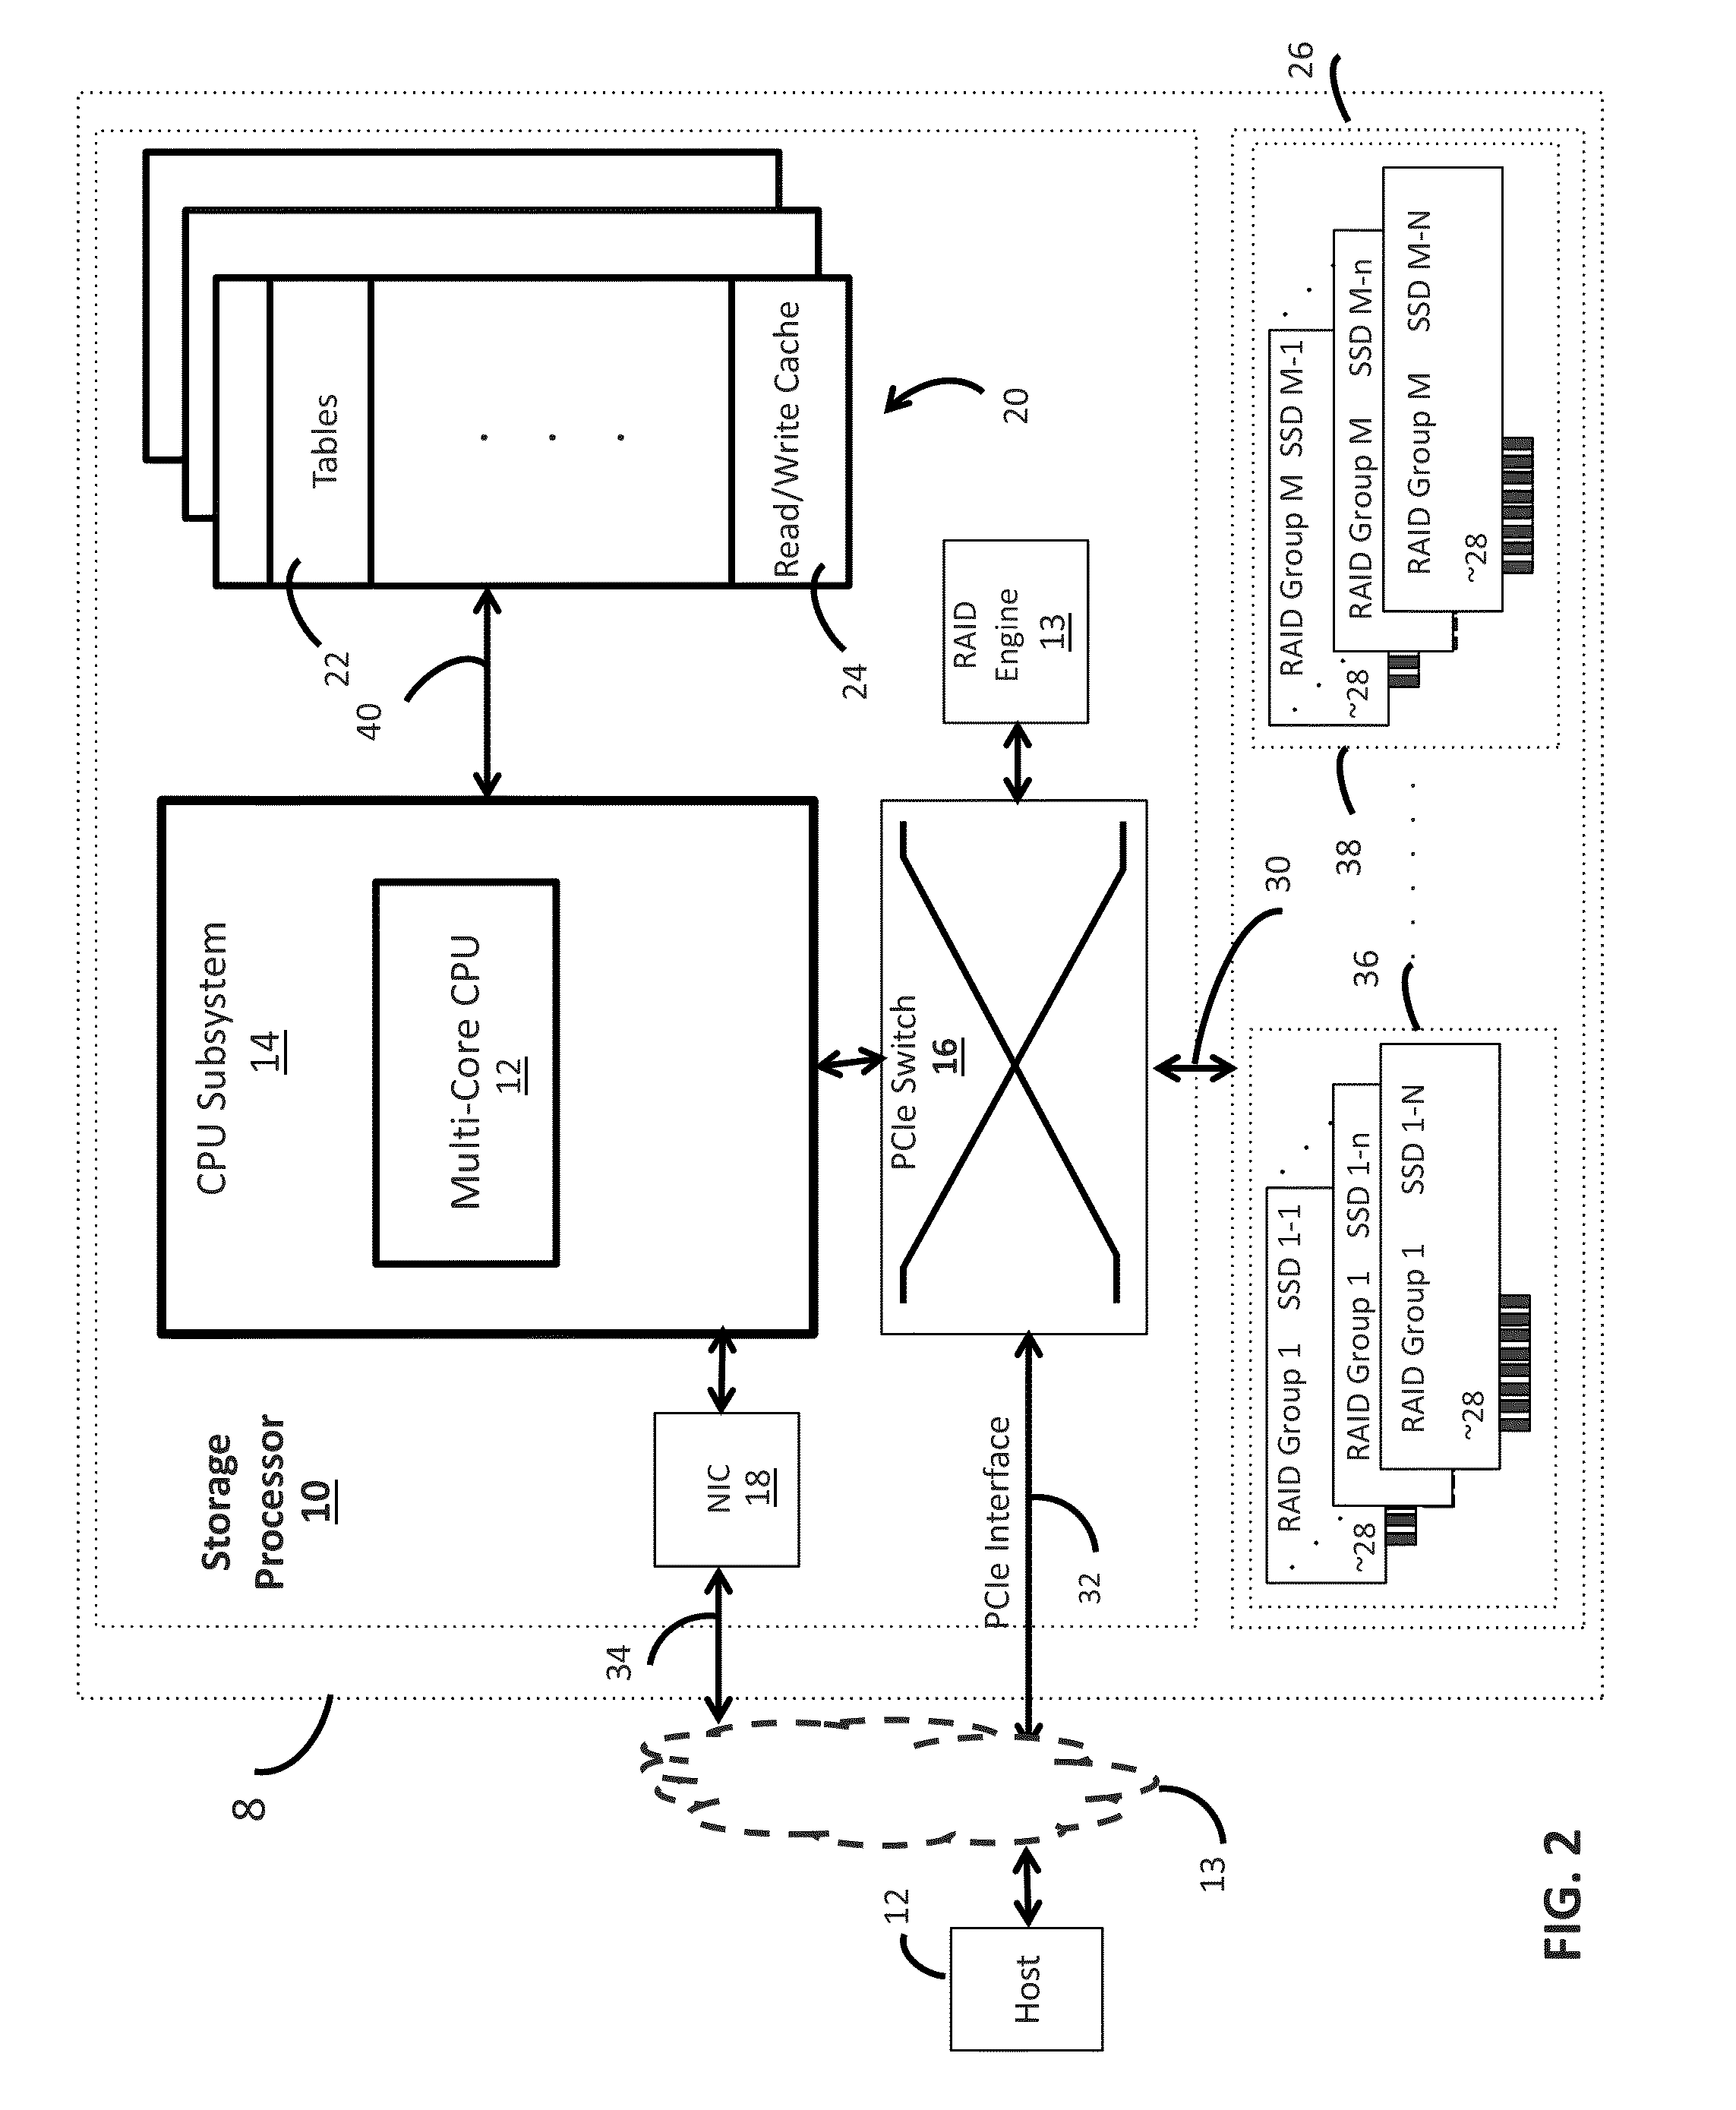 Storage system redundant array of solid state disk array